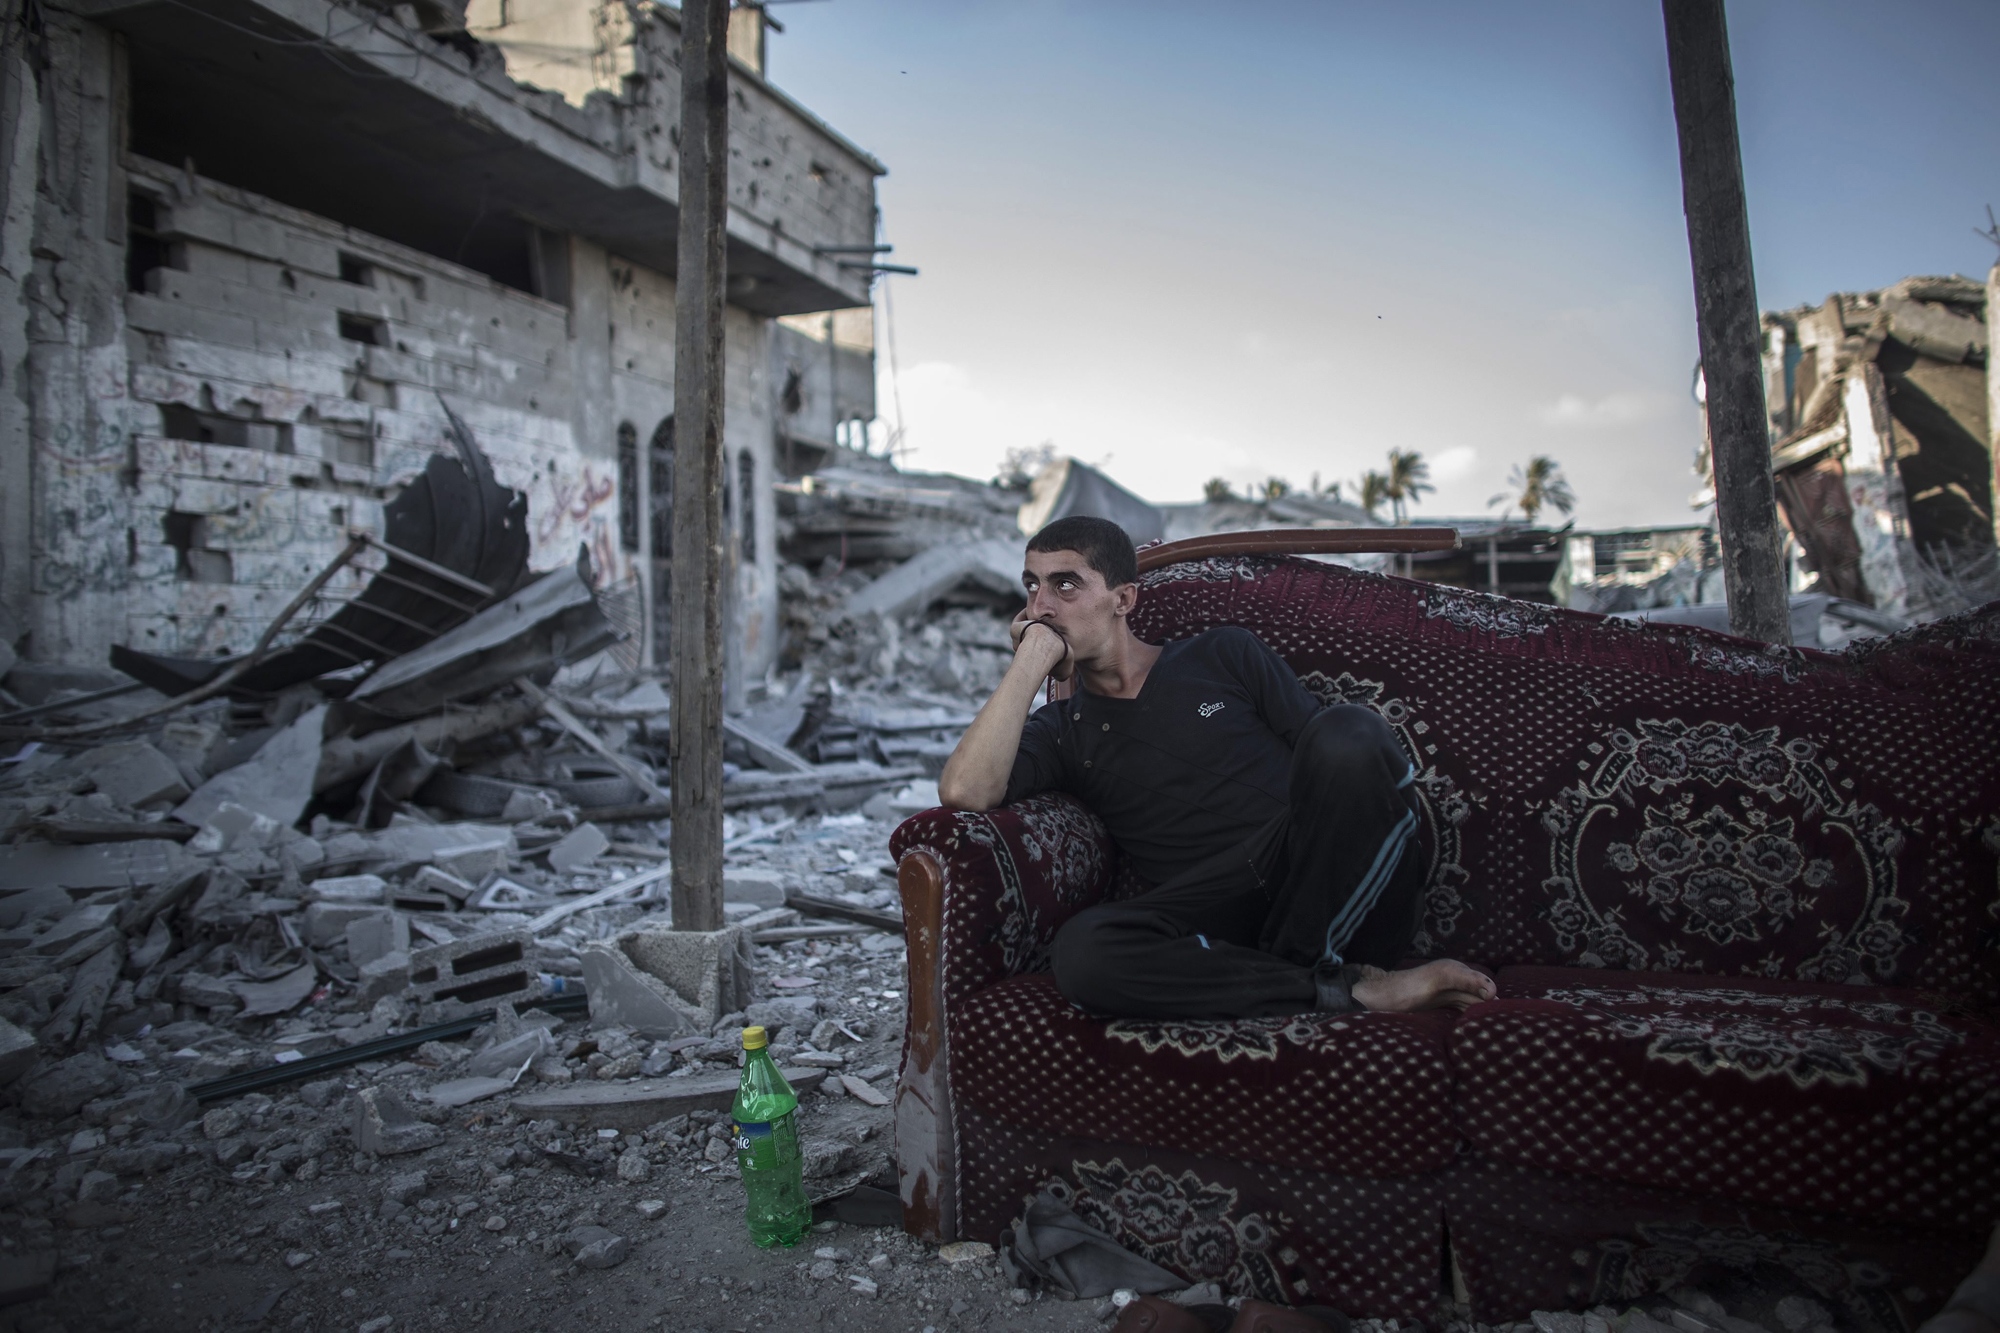 A Palestinian sits on a salvaged sofa outside his destroyed home in the Shujayeh neighborhood, east of Gaza City, Aug. 6, 2014. (Oliver Weiken—EPA)